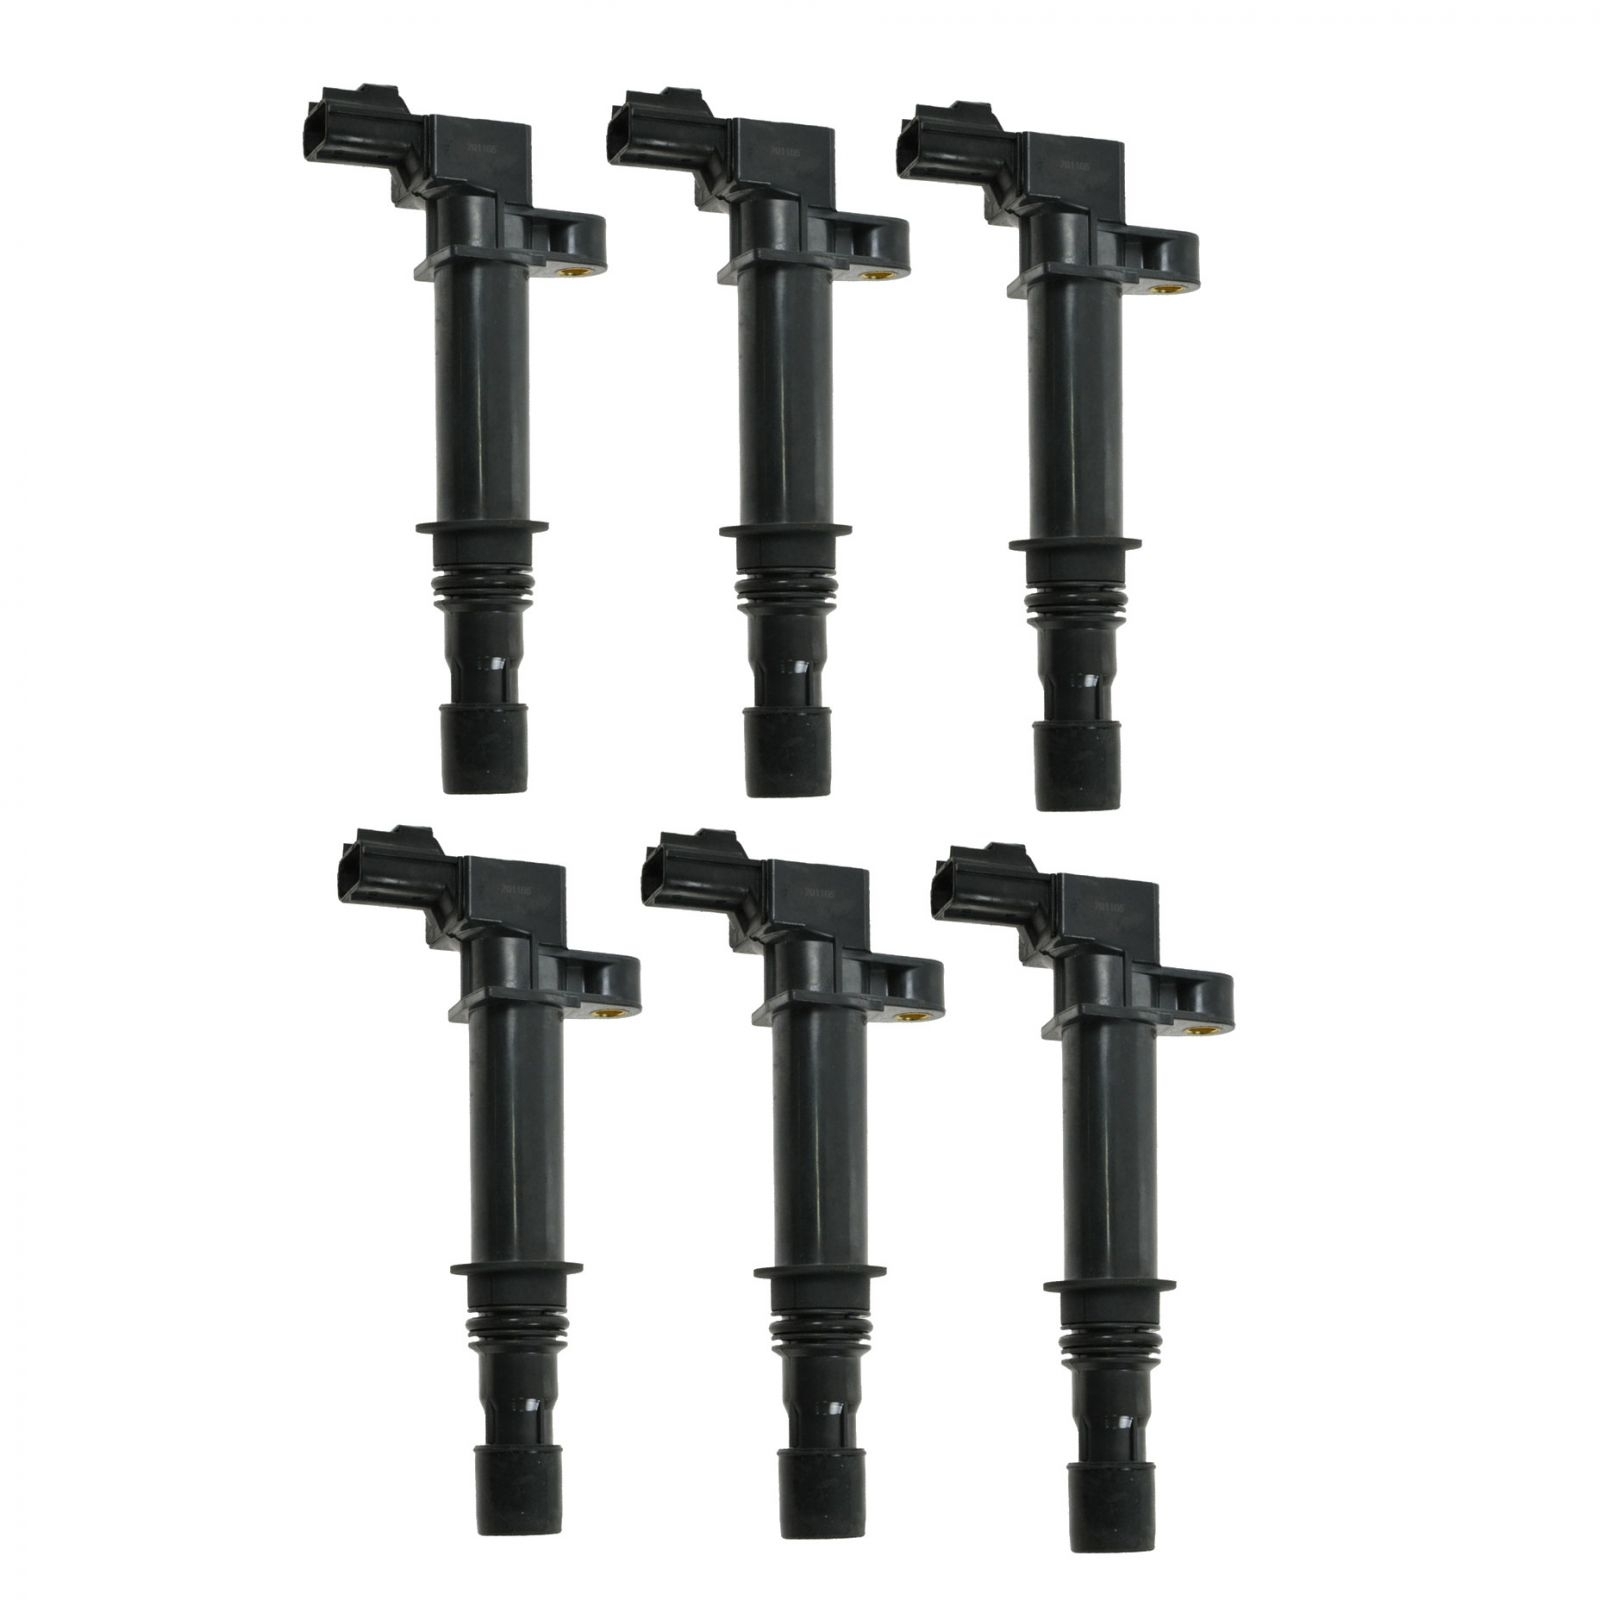 Trq 6 Piece Ignition Coil Set For 05-08 Grand Cherokee 02-08 Liberty 06-08 Commander, HWNV-ICA61506